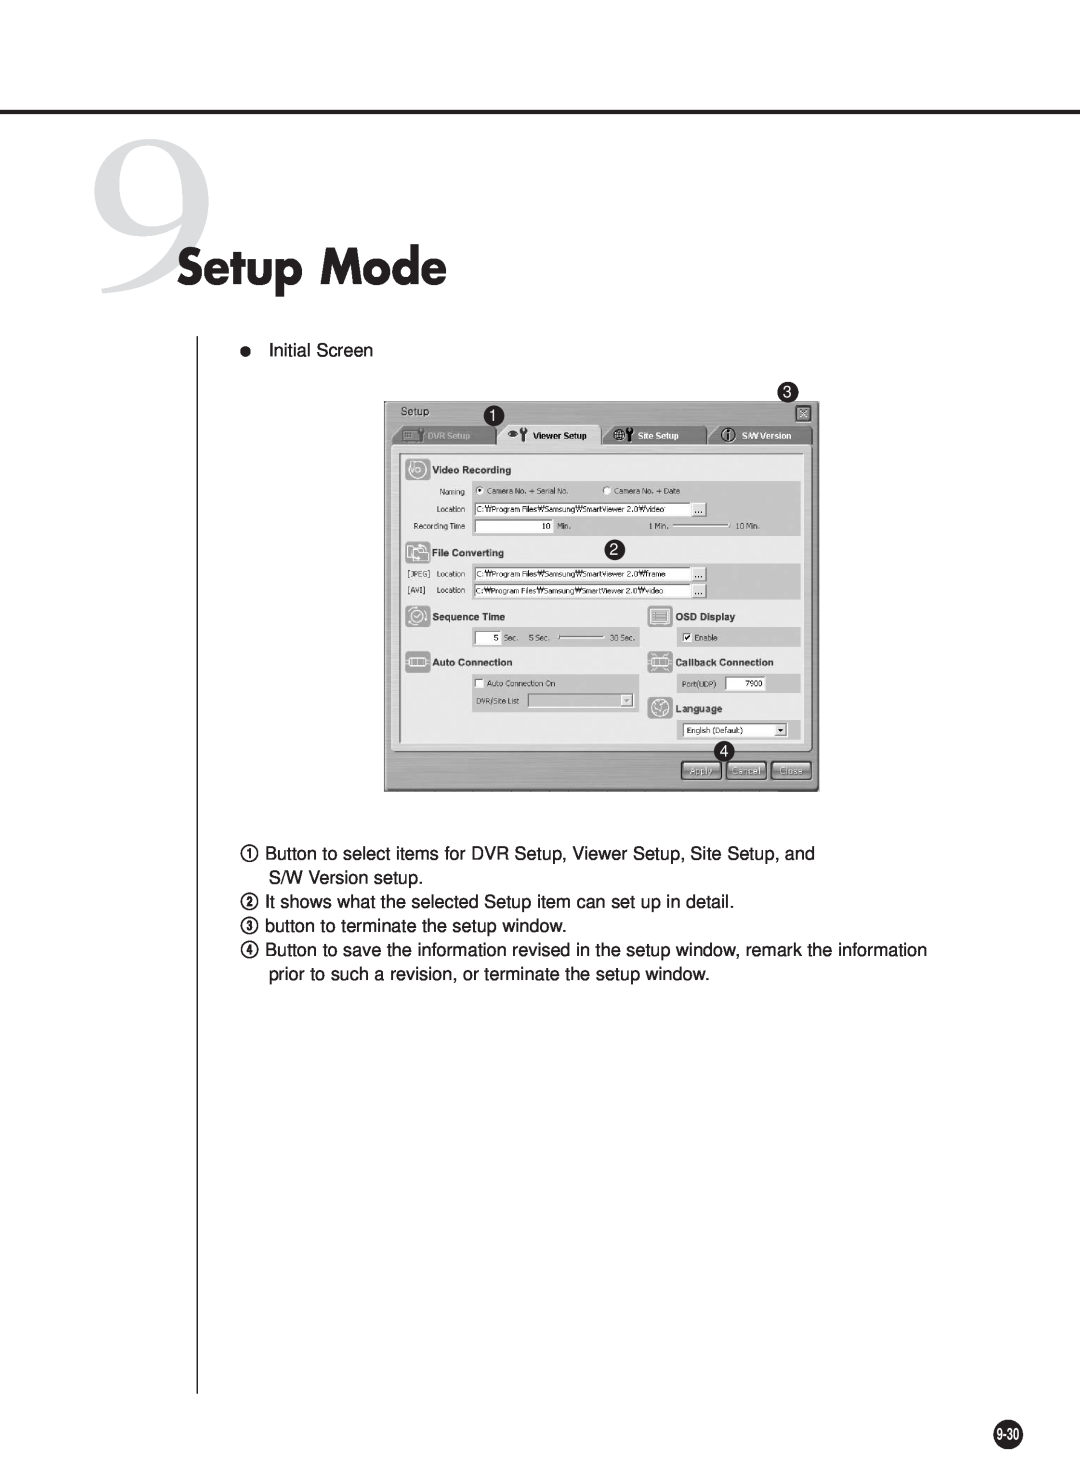 Samsung SHR-2040P/XEC 9Setup Mode, Initial Screen, @ It shows what the selected Setup item can set up in detail, 9-30 